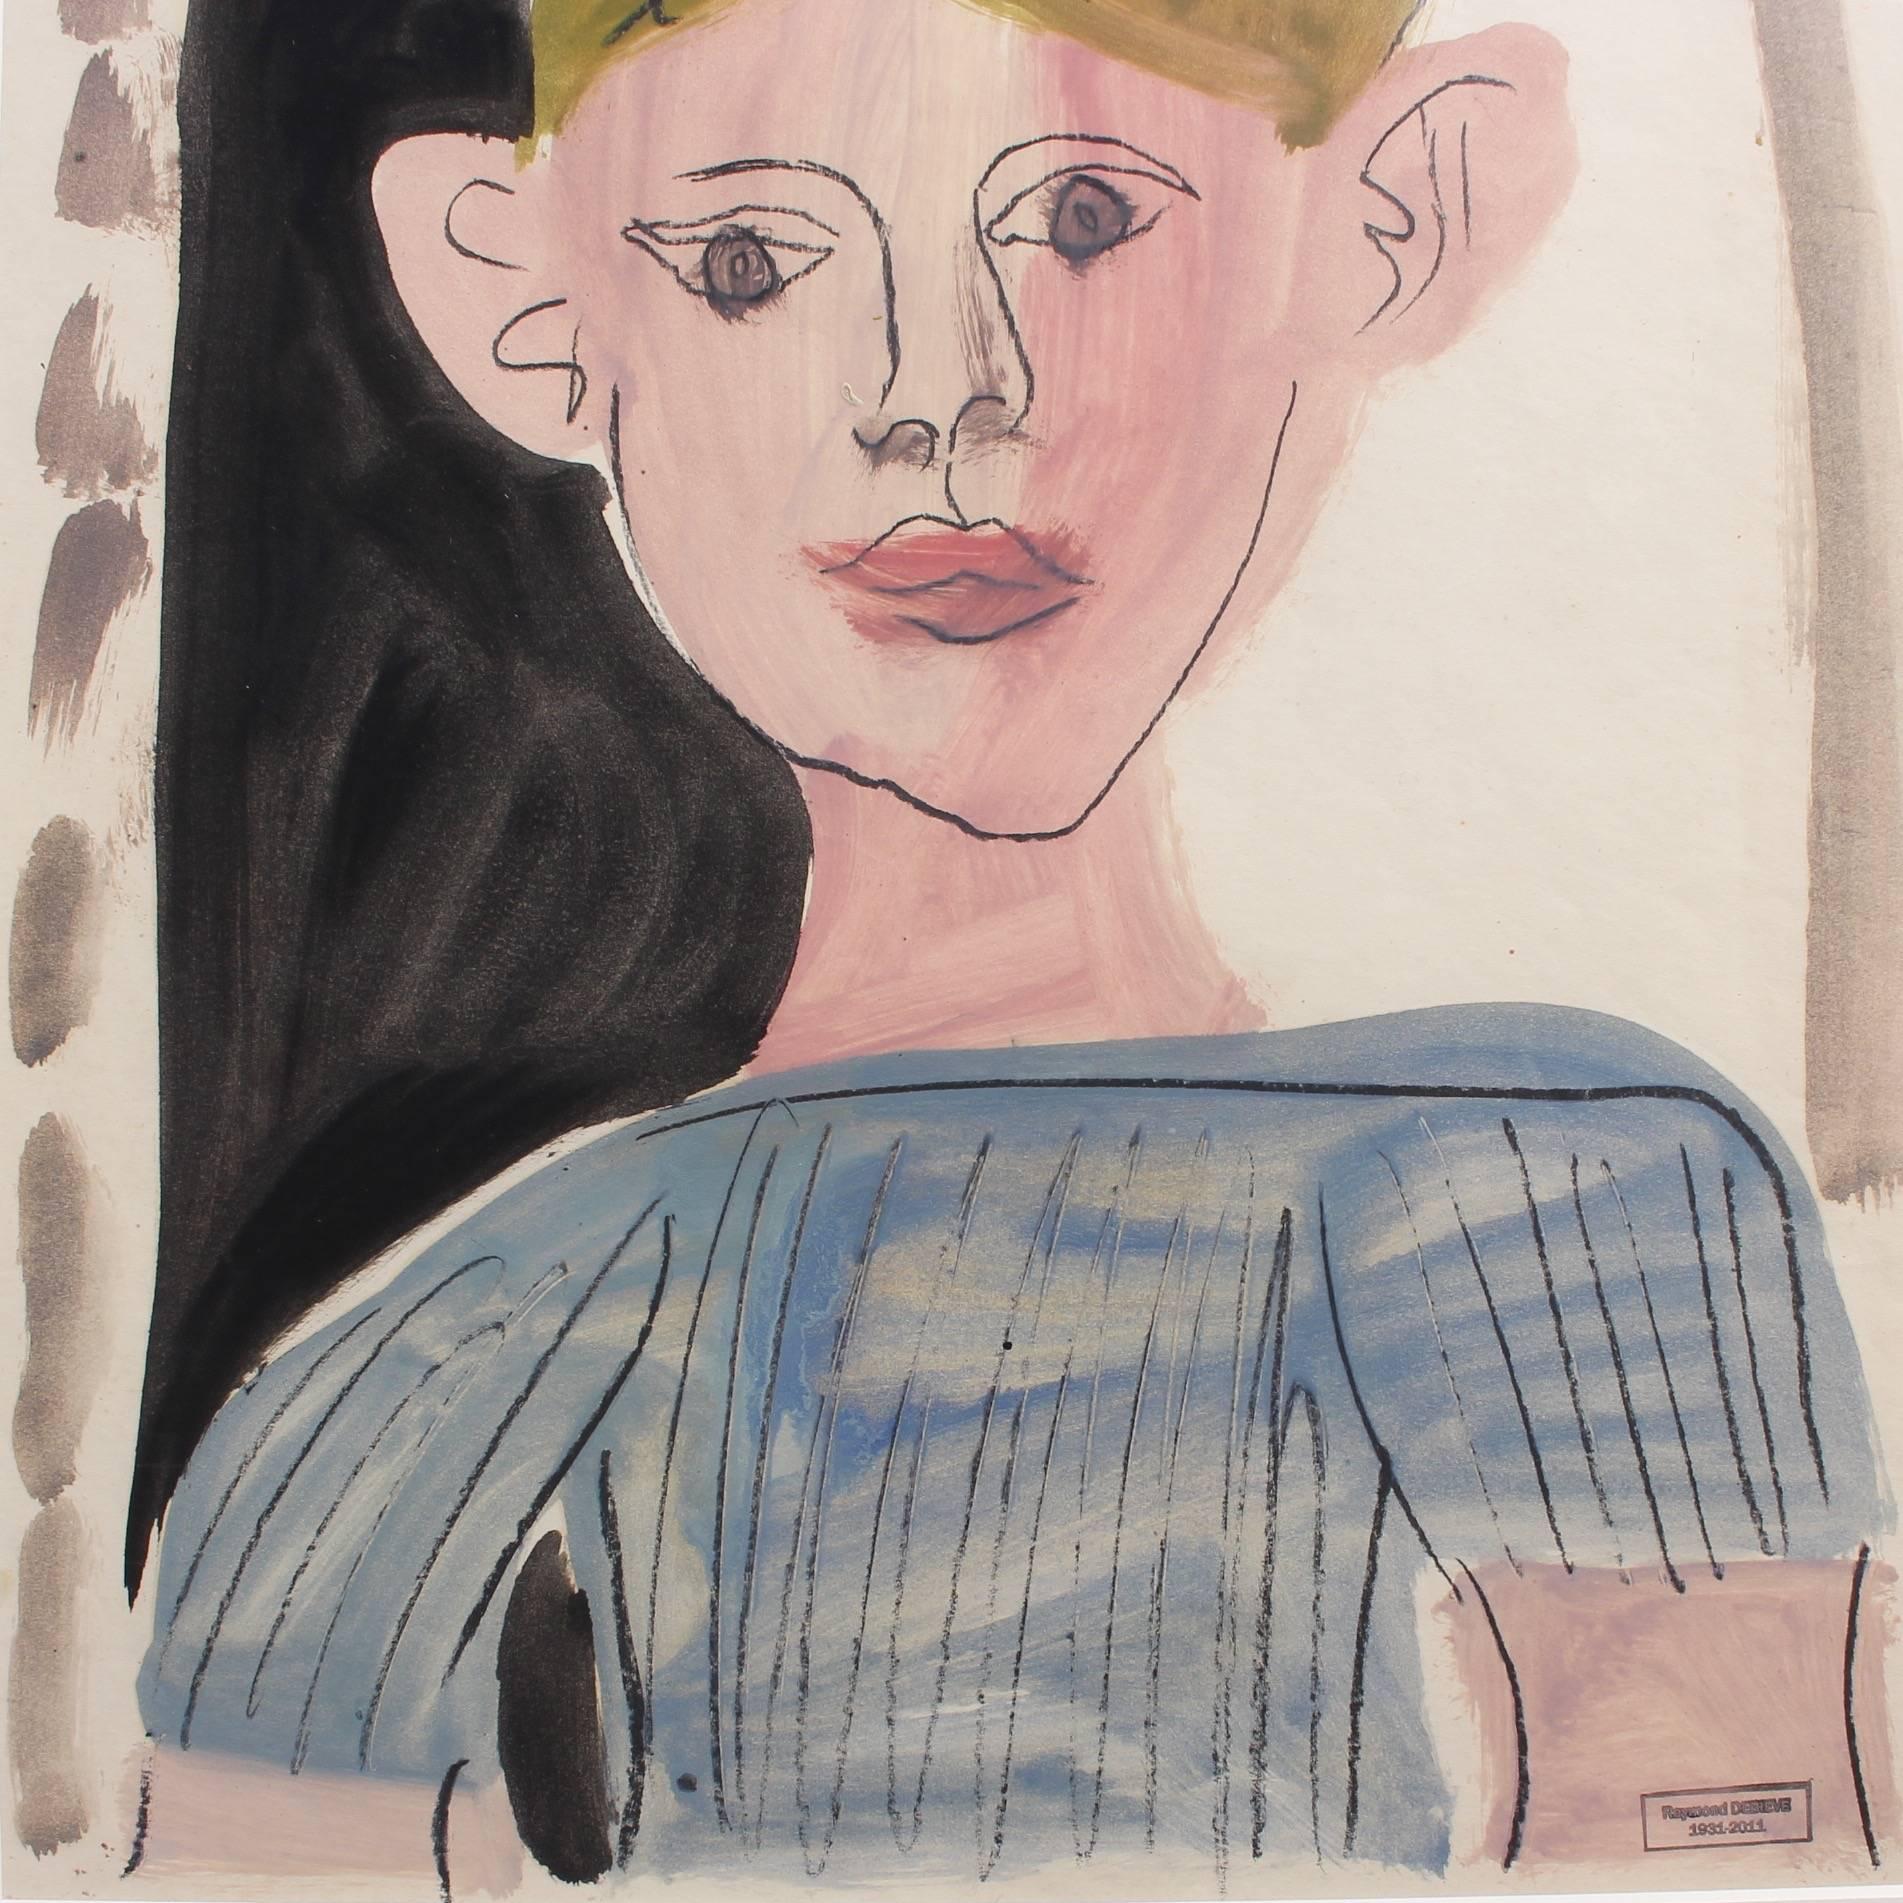 'Portrait of a Young Boy', mixed media on paper (circa 1960s) by Raymond Dèbieve (1931 - 2011). This is a warm and sympathetic portrait of a young boy, possibly the artist's son, Vincent, who was born in 1958. The boy's wide ears, pale skin and